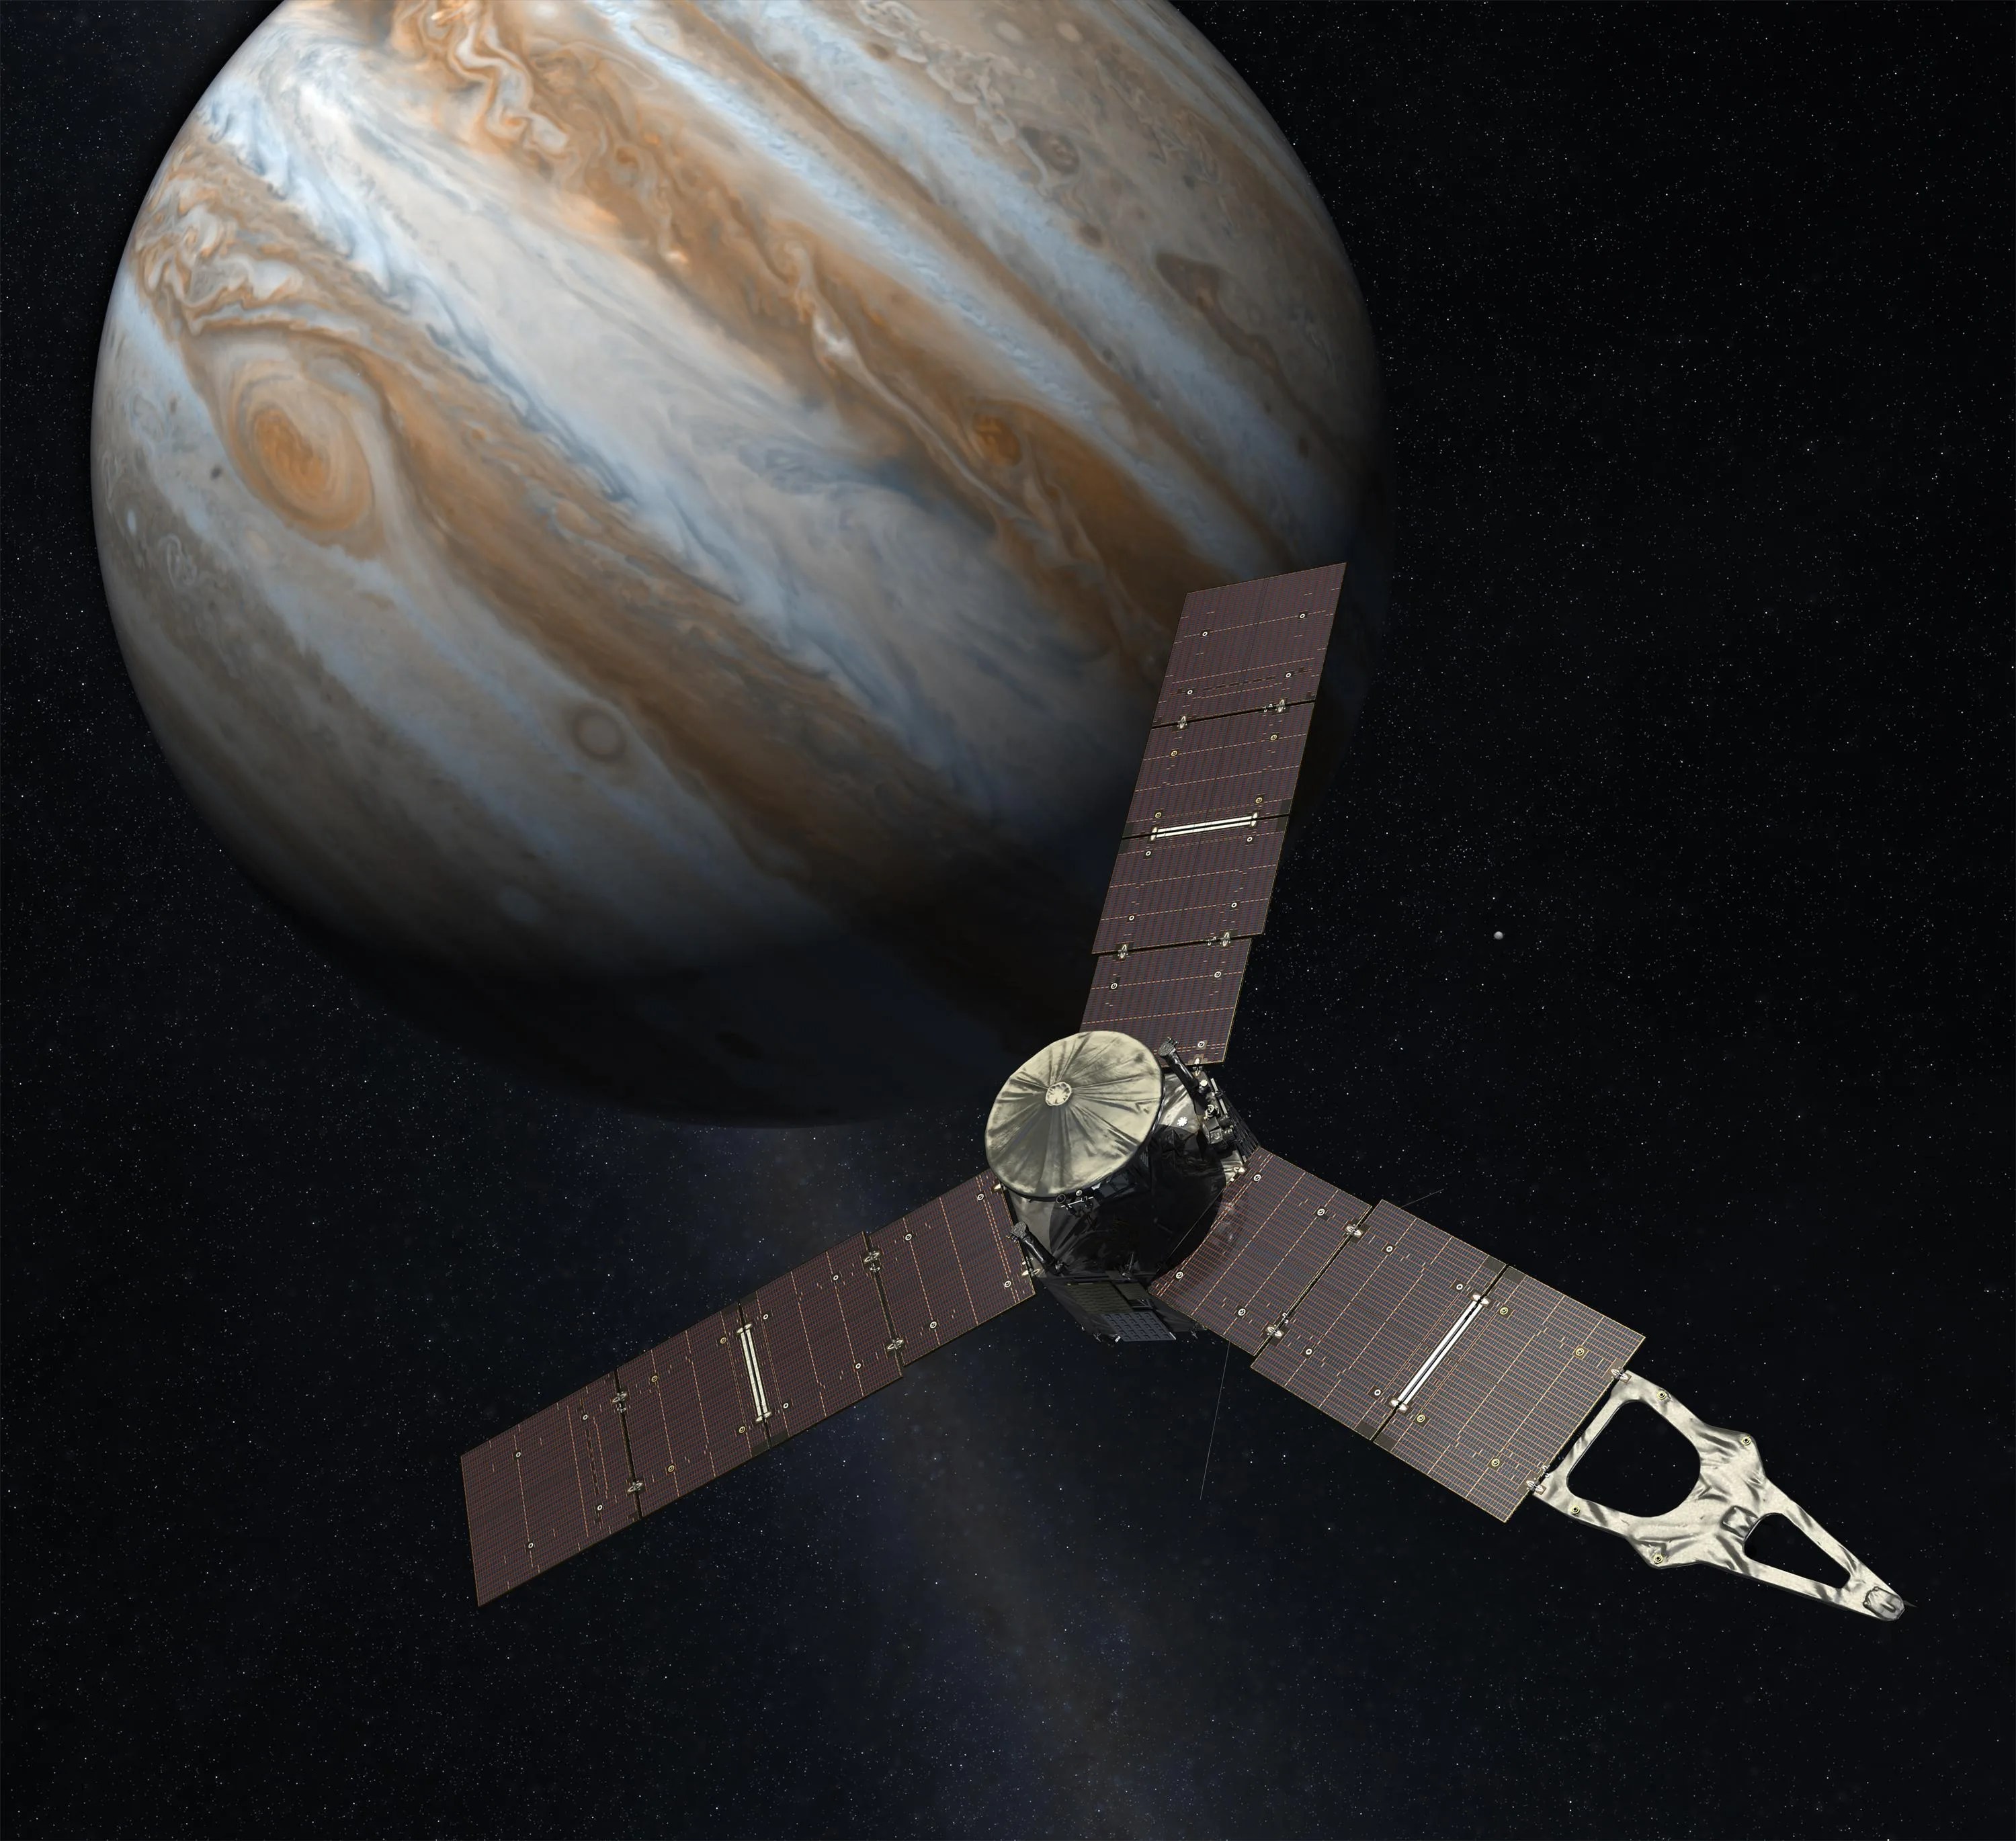 Mission to Jupiter - Get facts about this planet